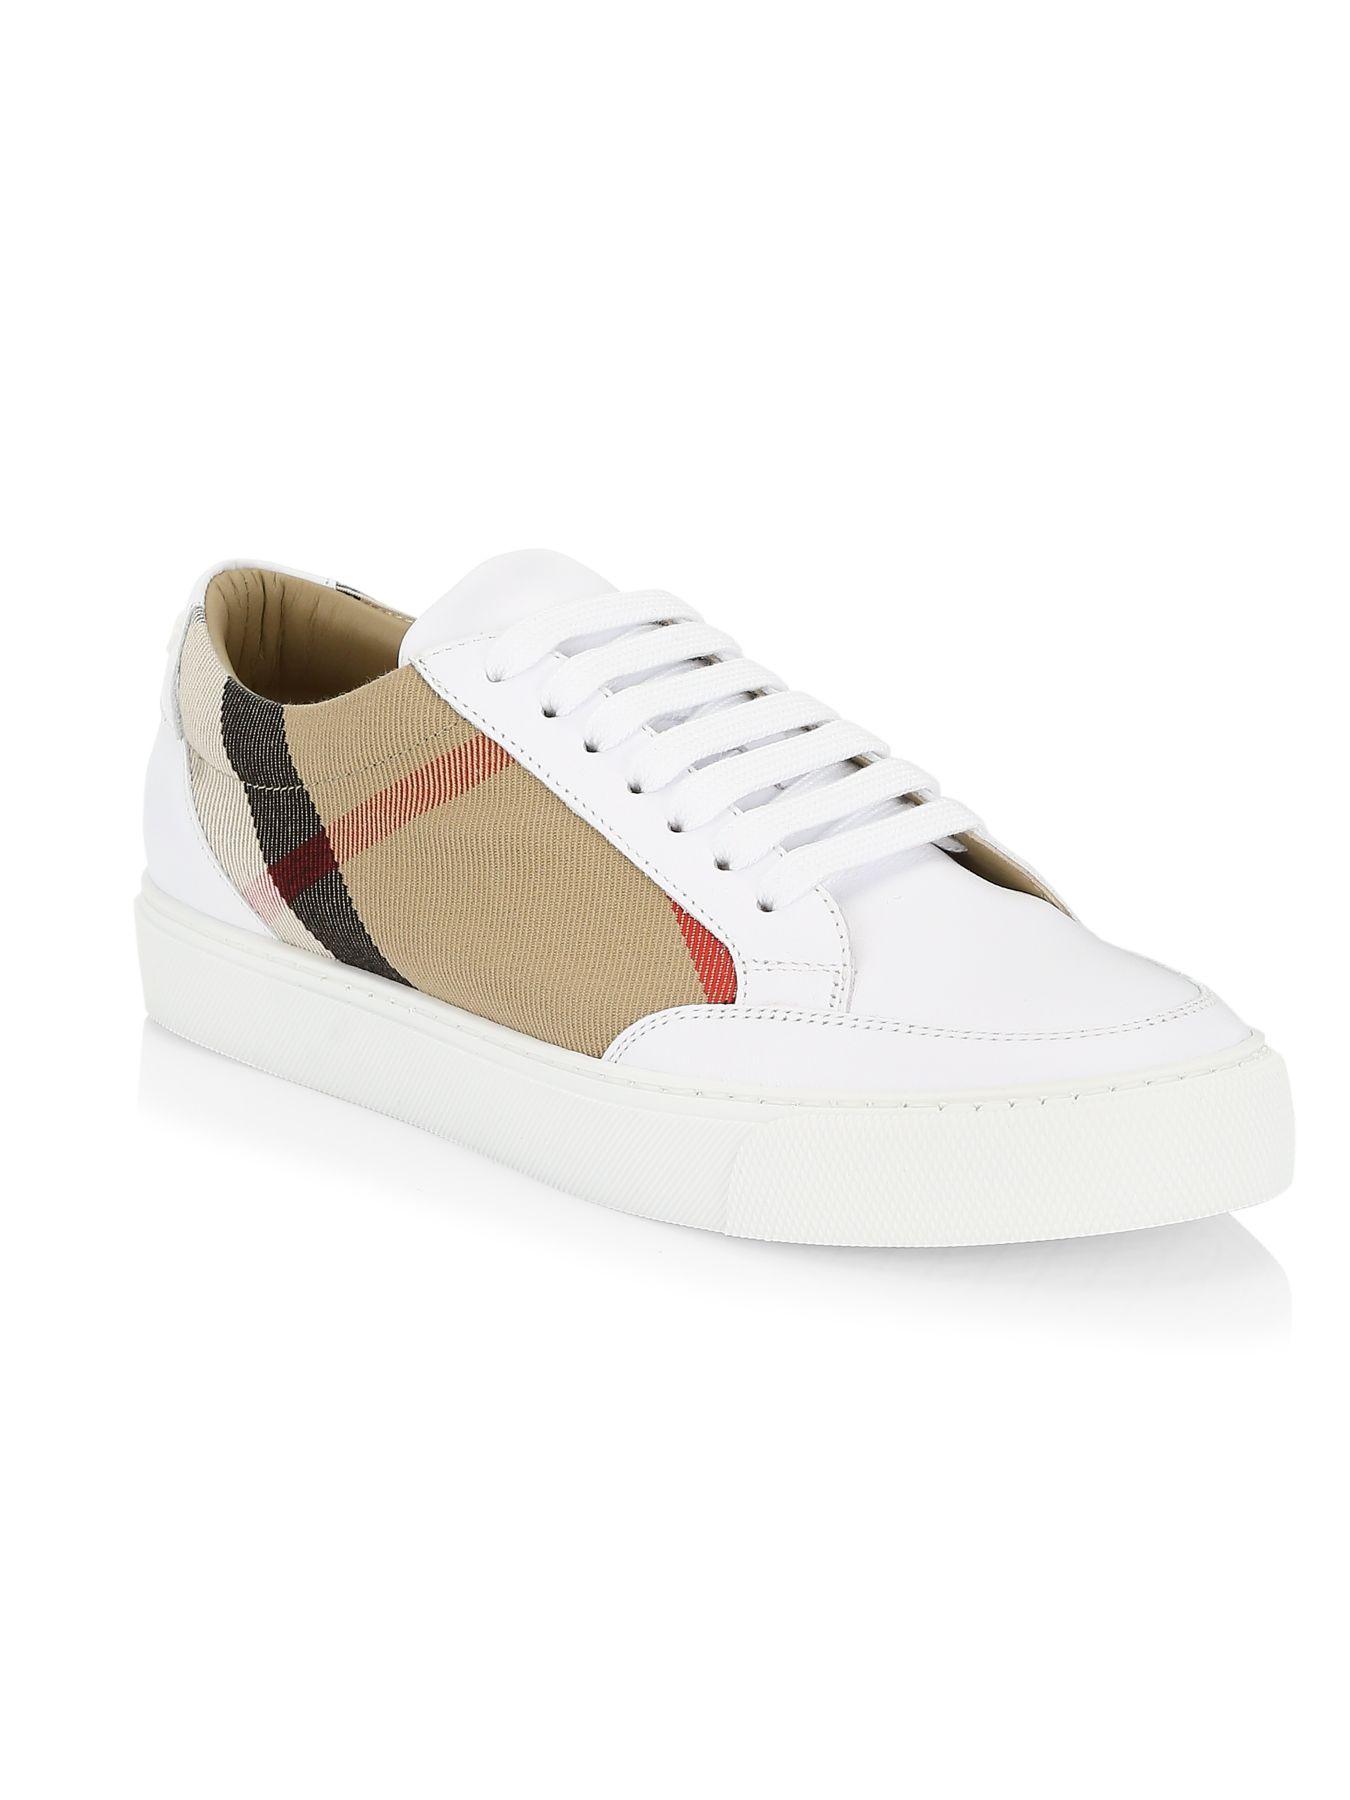 Burberry House Check & Leather Sneaker in White | Lyst